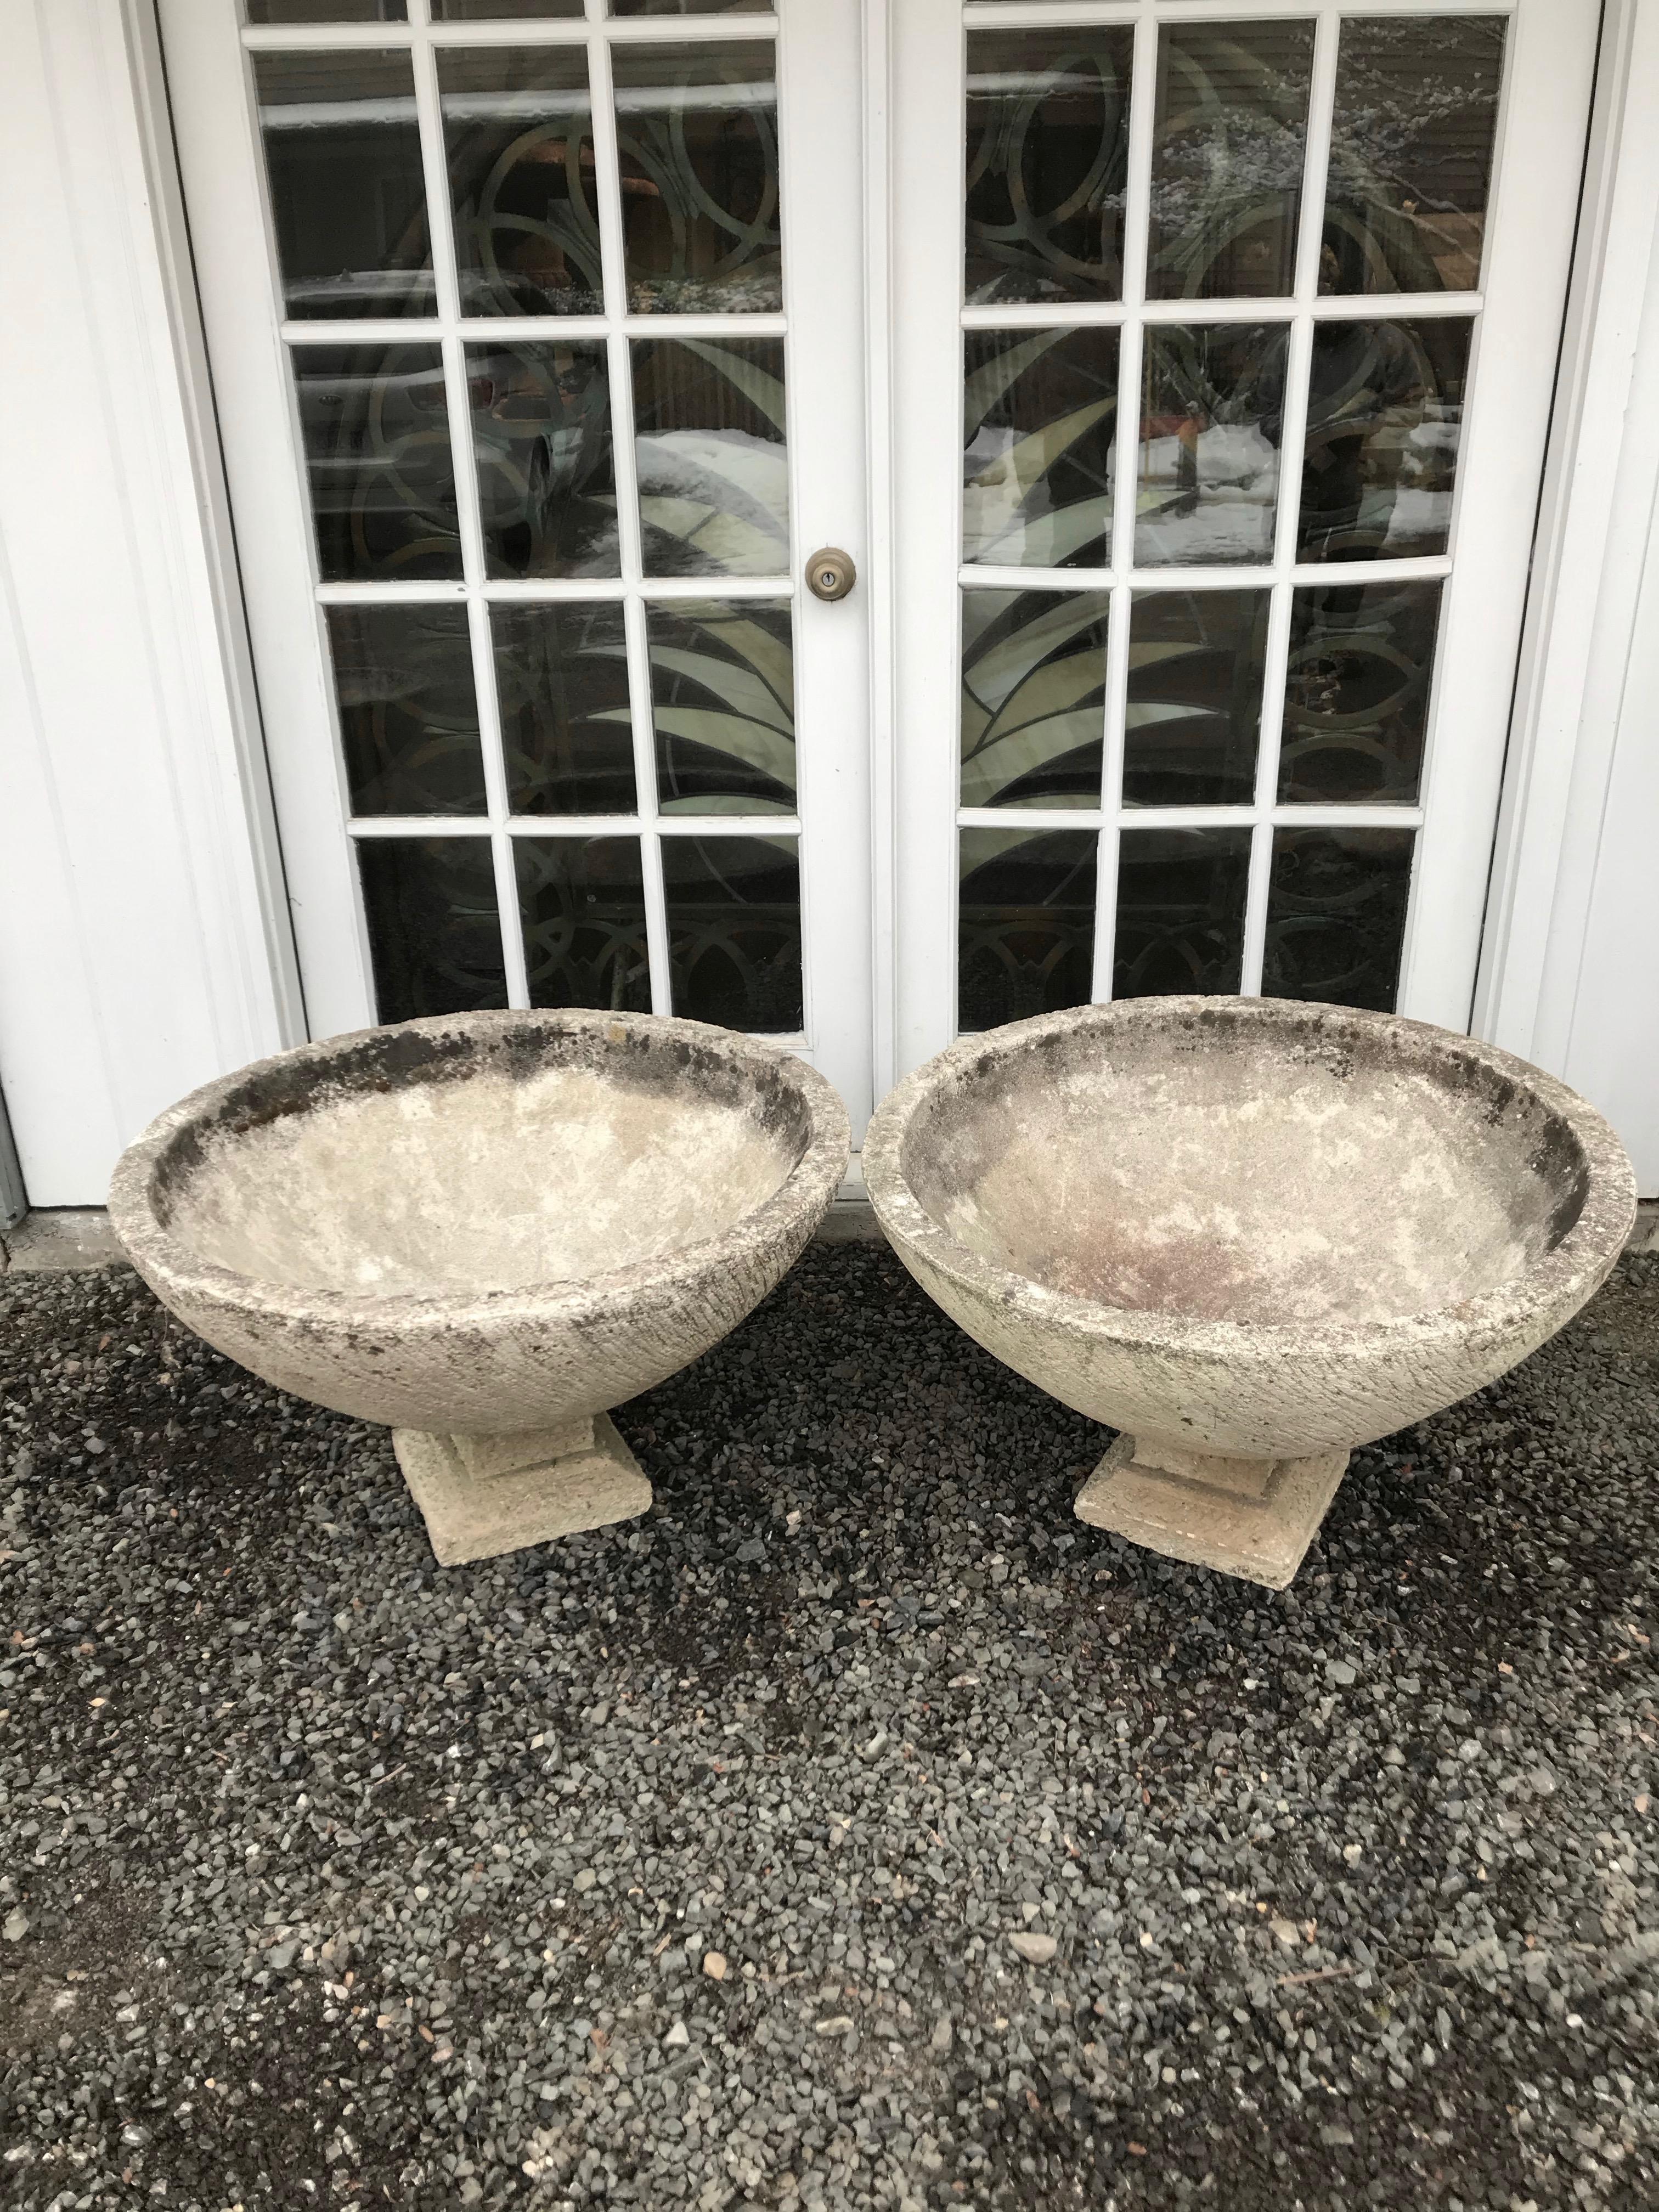 Pair of Large Round French Cast Stone Bowl Planters on Integral Feet #1 (Französisch)